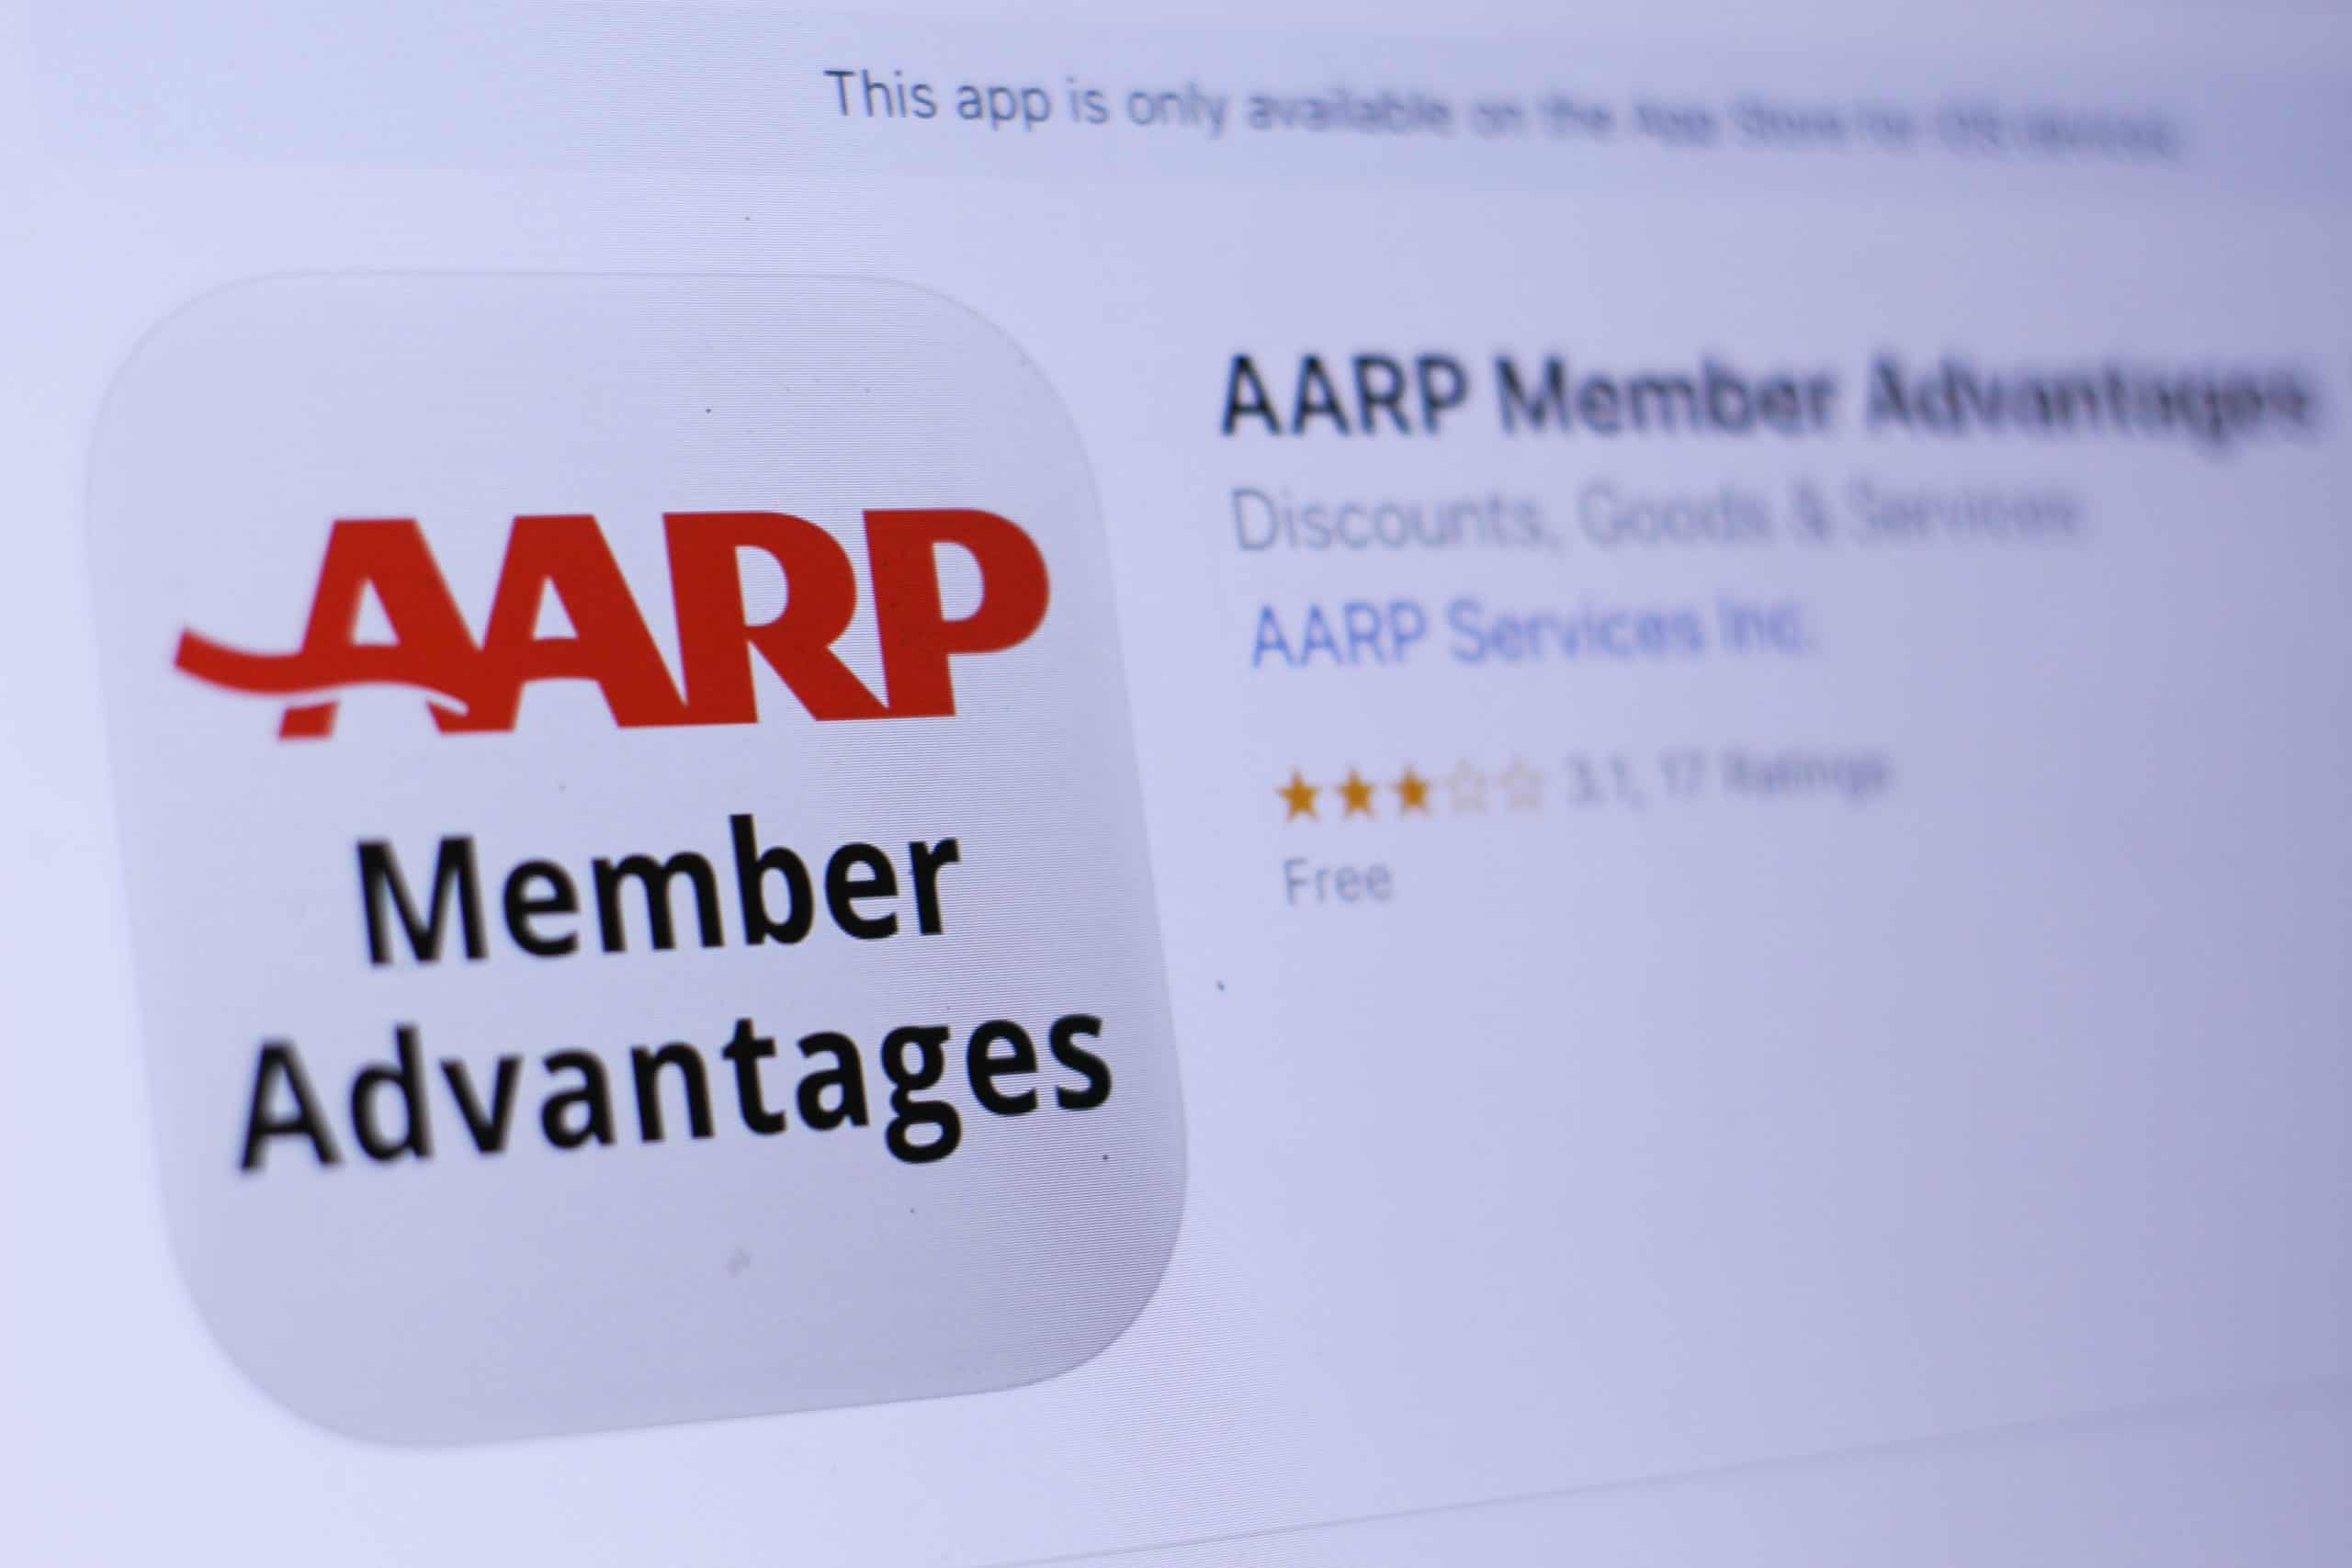 AARP Member Advantages in the app store